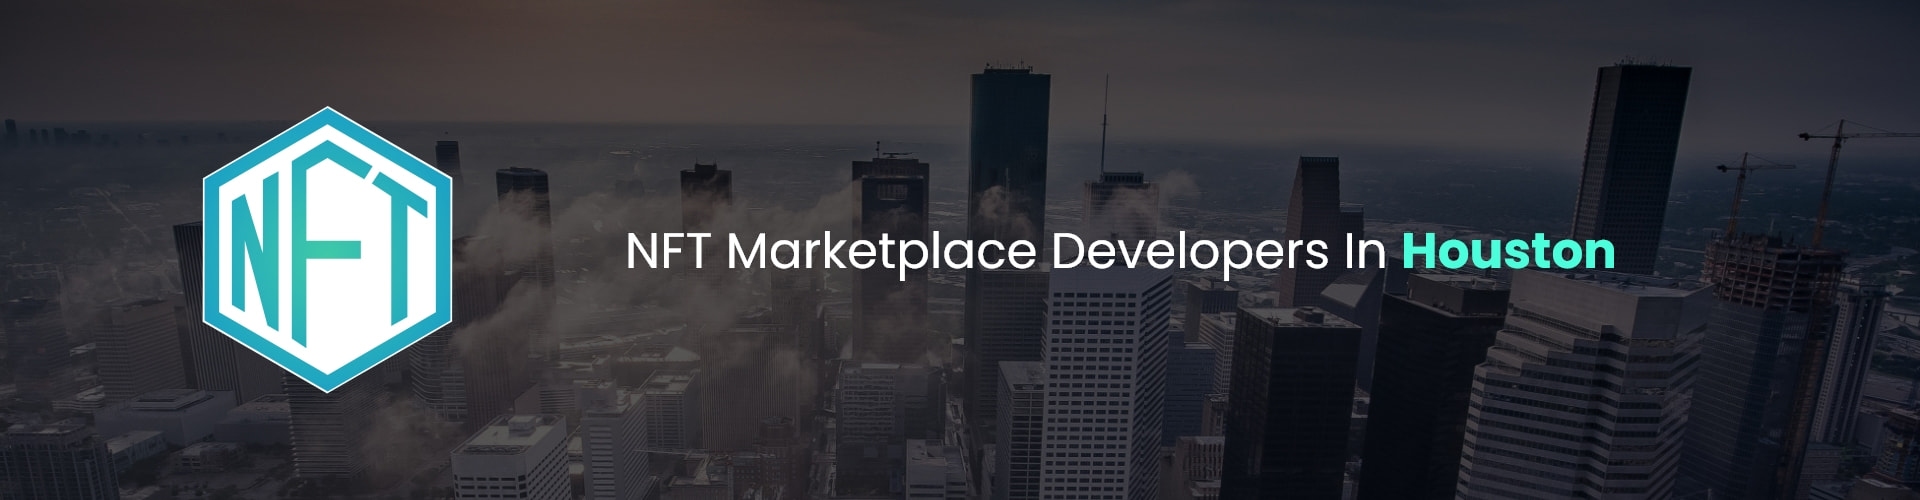 hire nft marketplace developers in houston